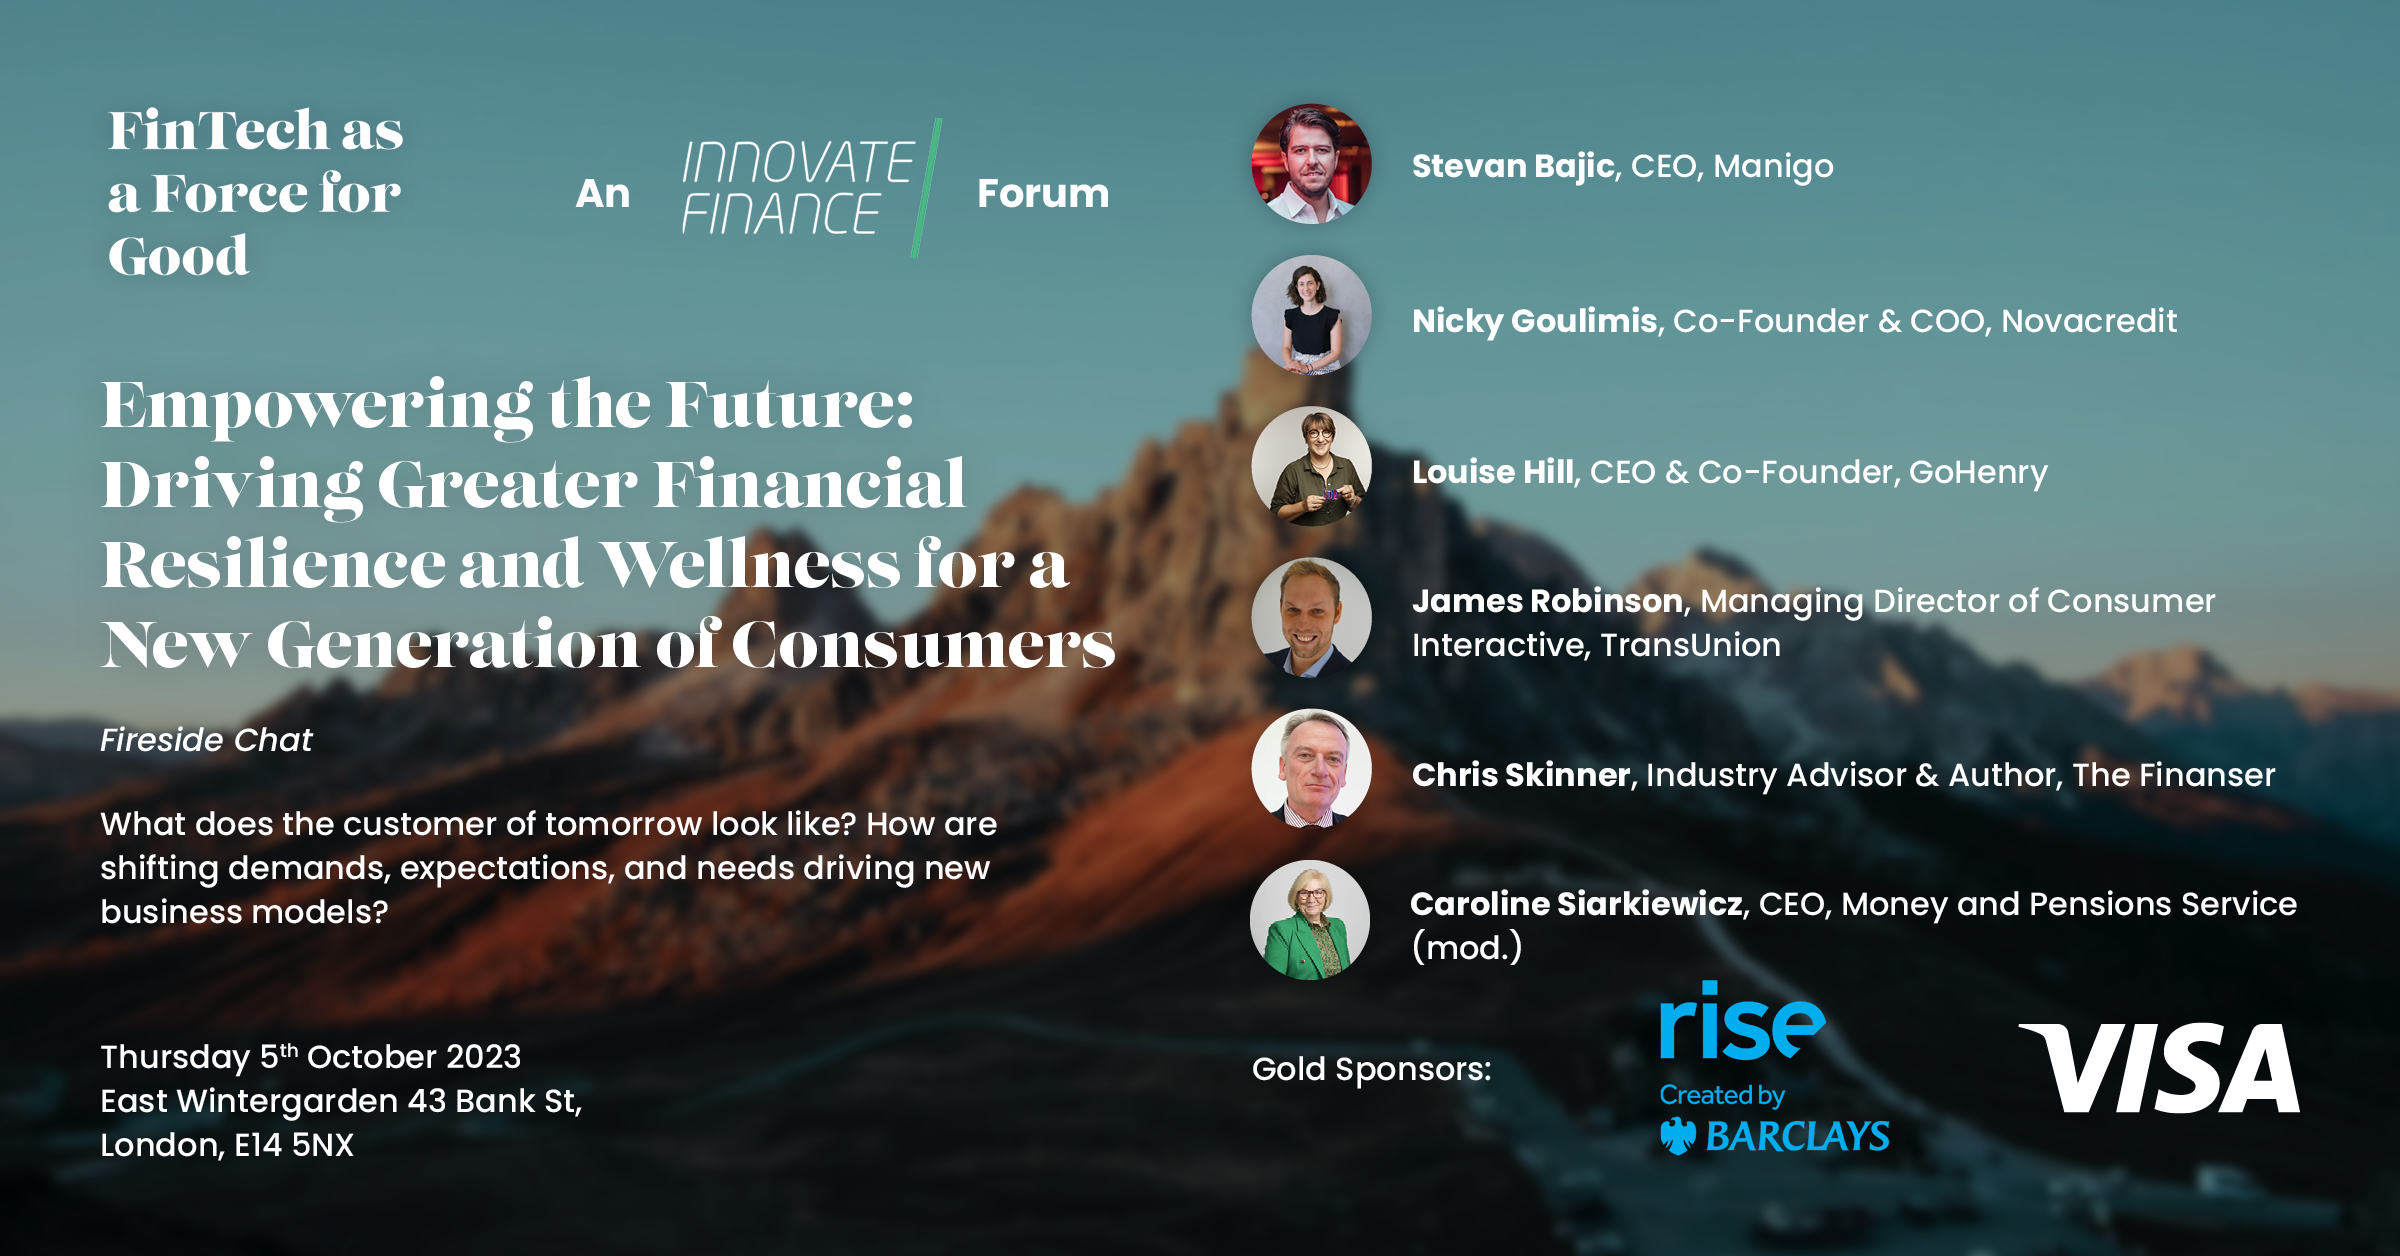 Fintech as a Force for Good Forum 23 – Empowering the Future